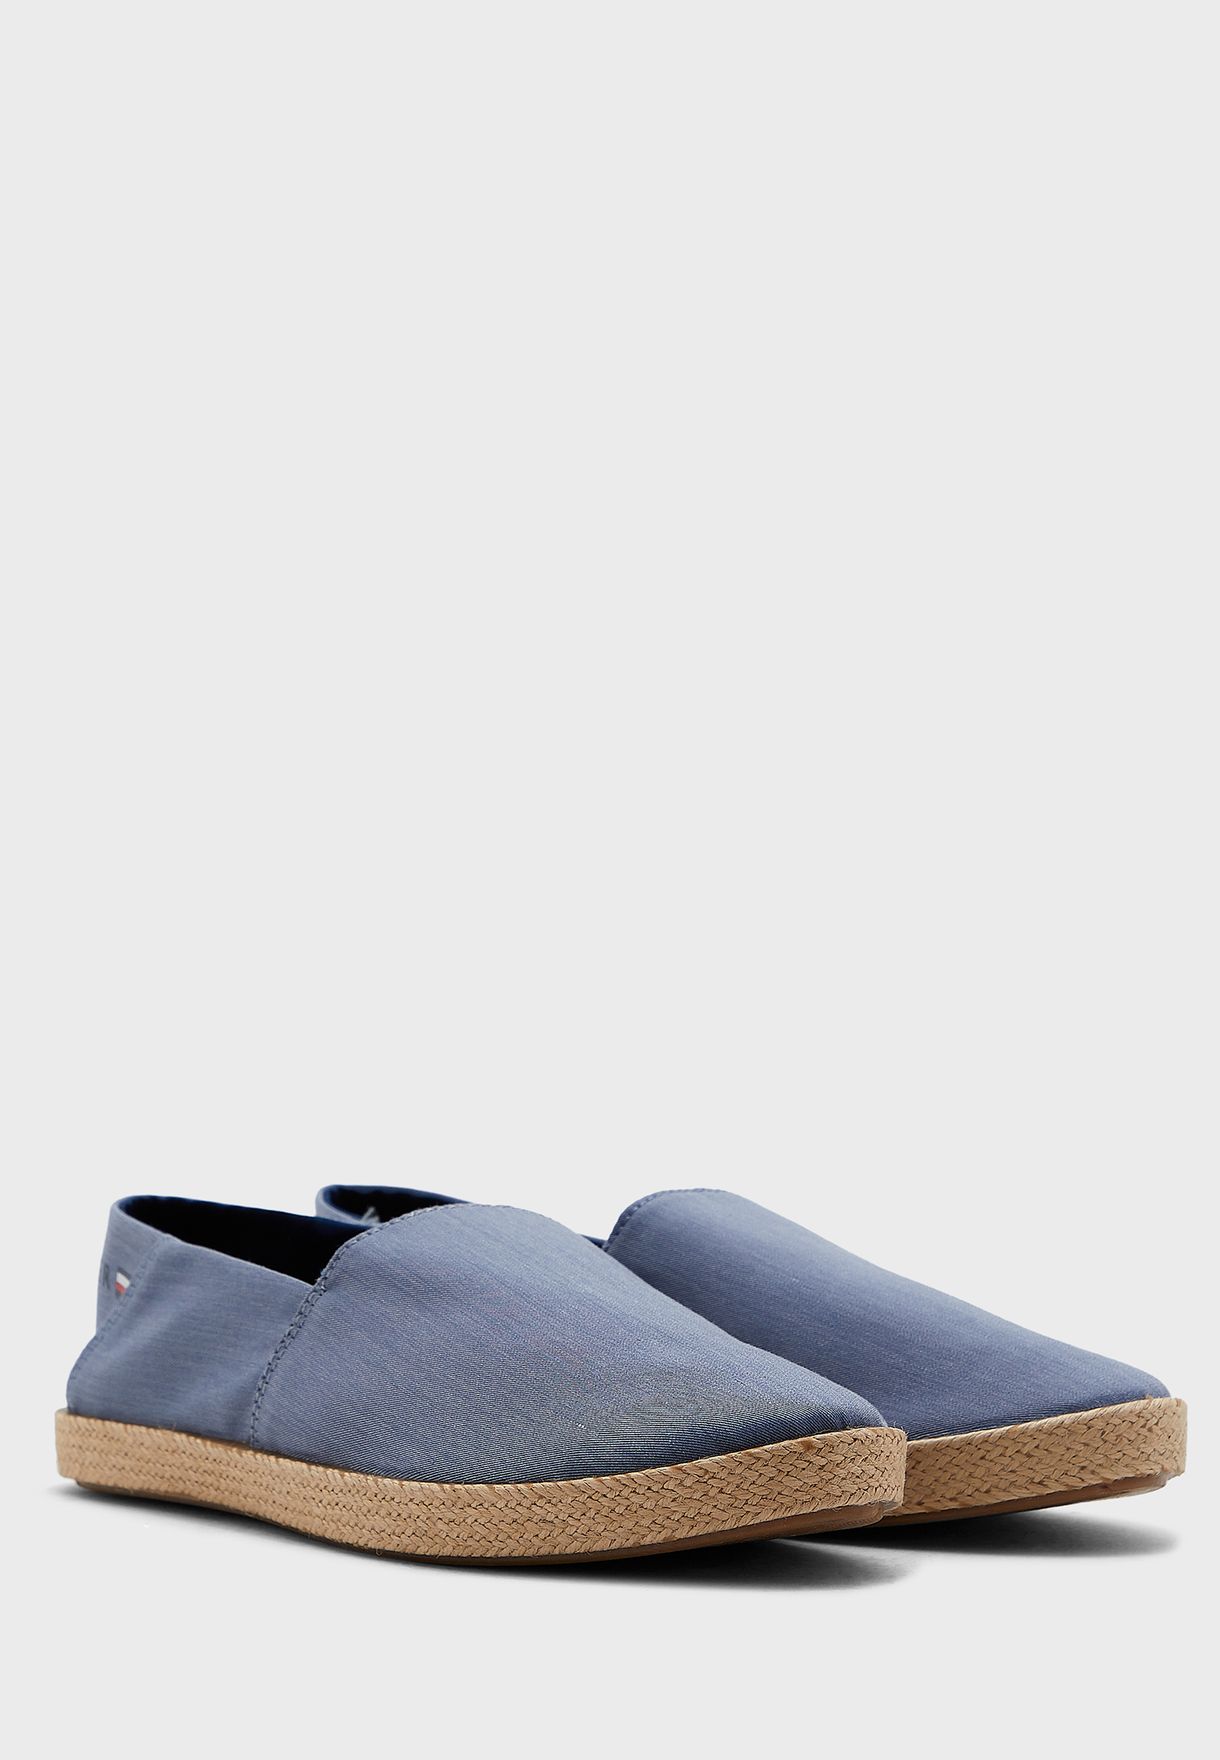 Chambray Slip On Casual Slip Ons